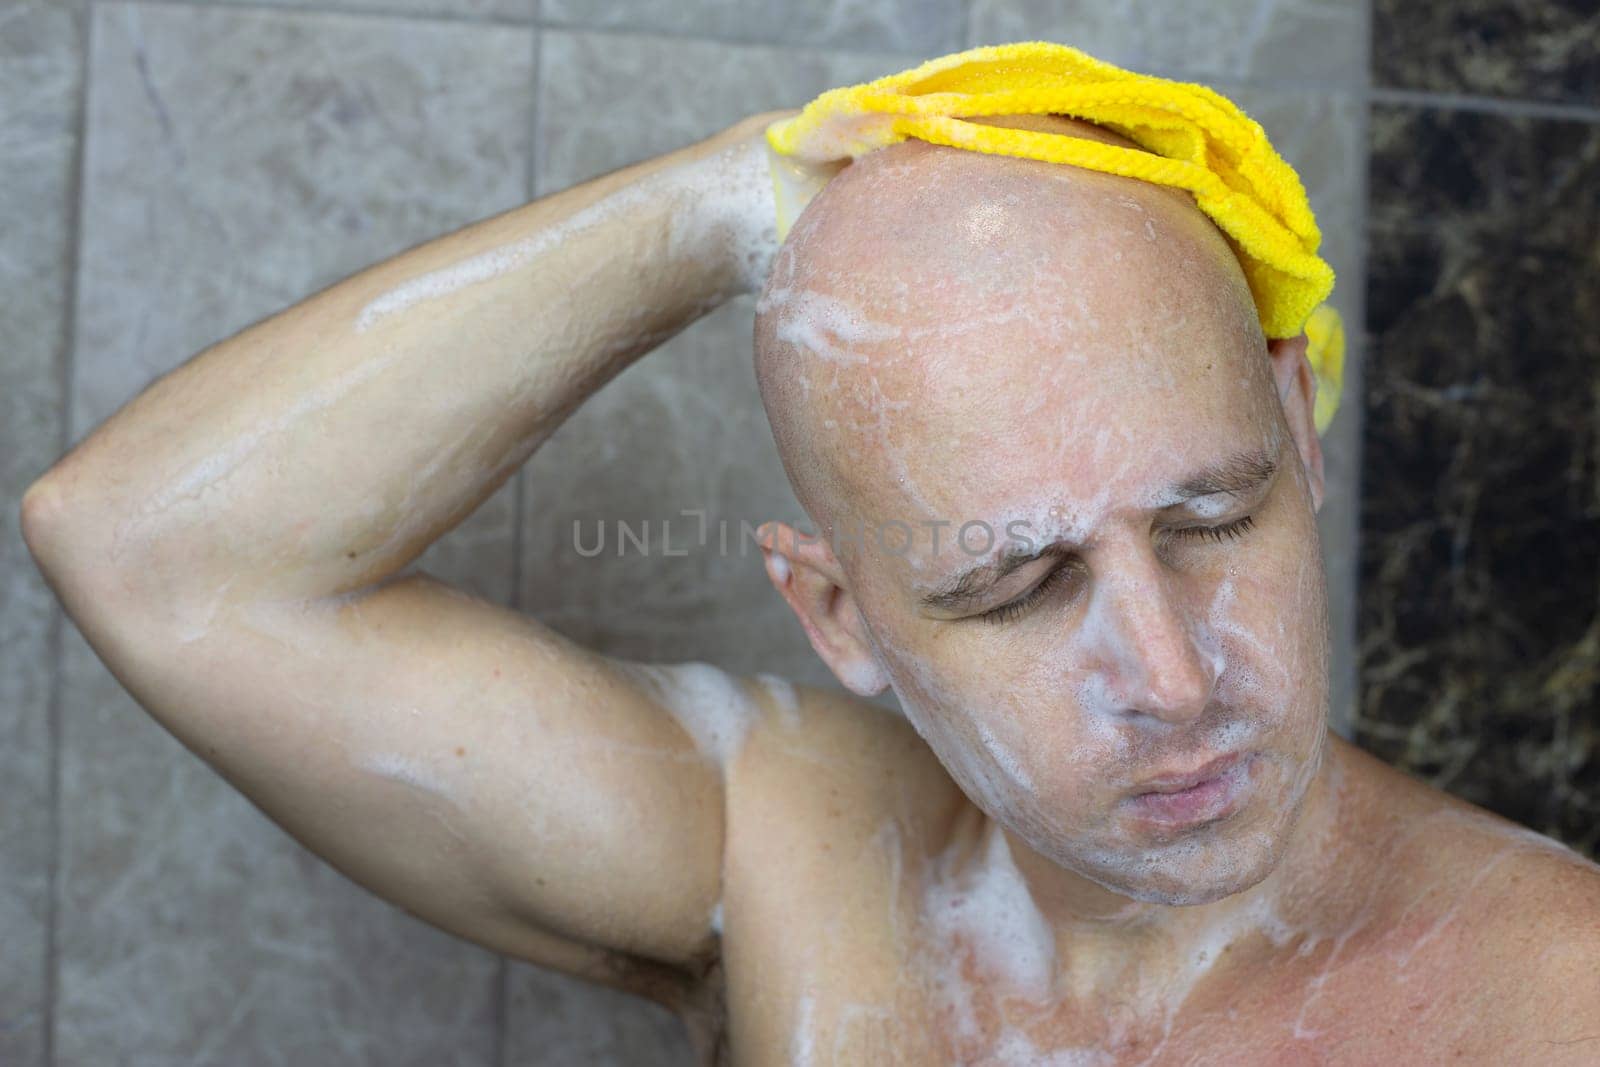 Man with closed eyes in shower washes his bald hairless head with washcloth and foam